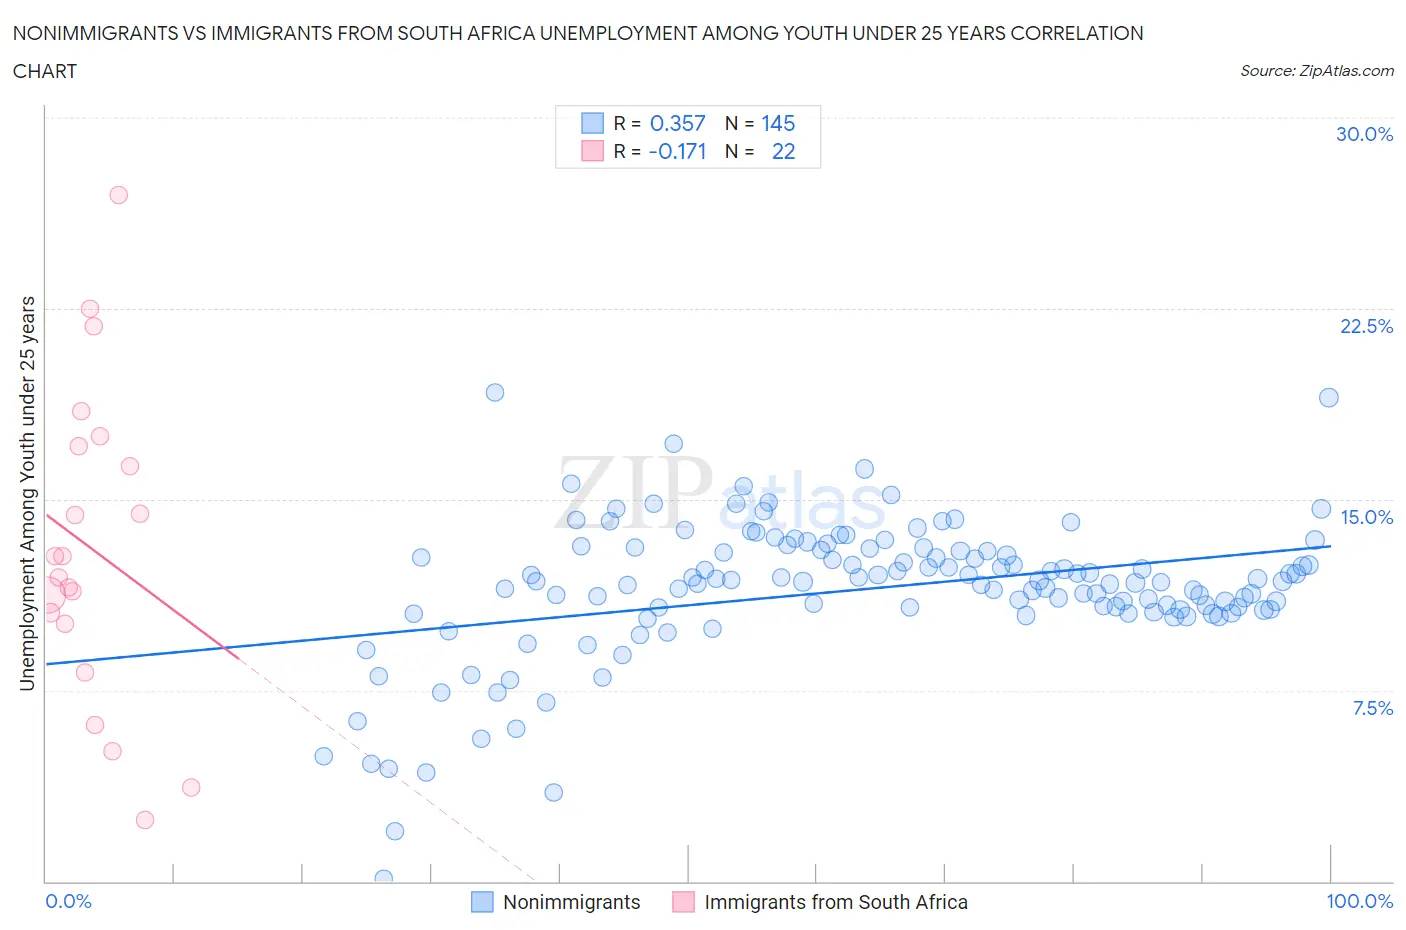 Nonimmigrants vs Immigrants from South Africa Unemployment Among Youth under 25 years